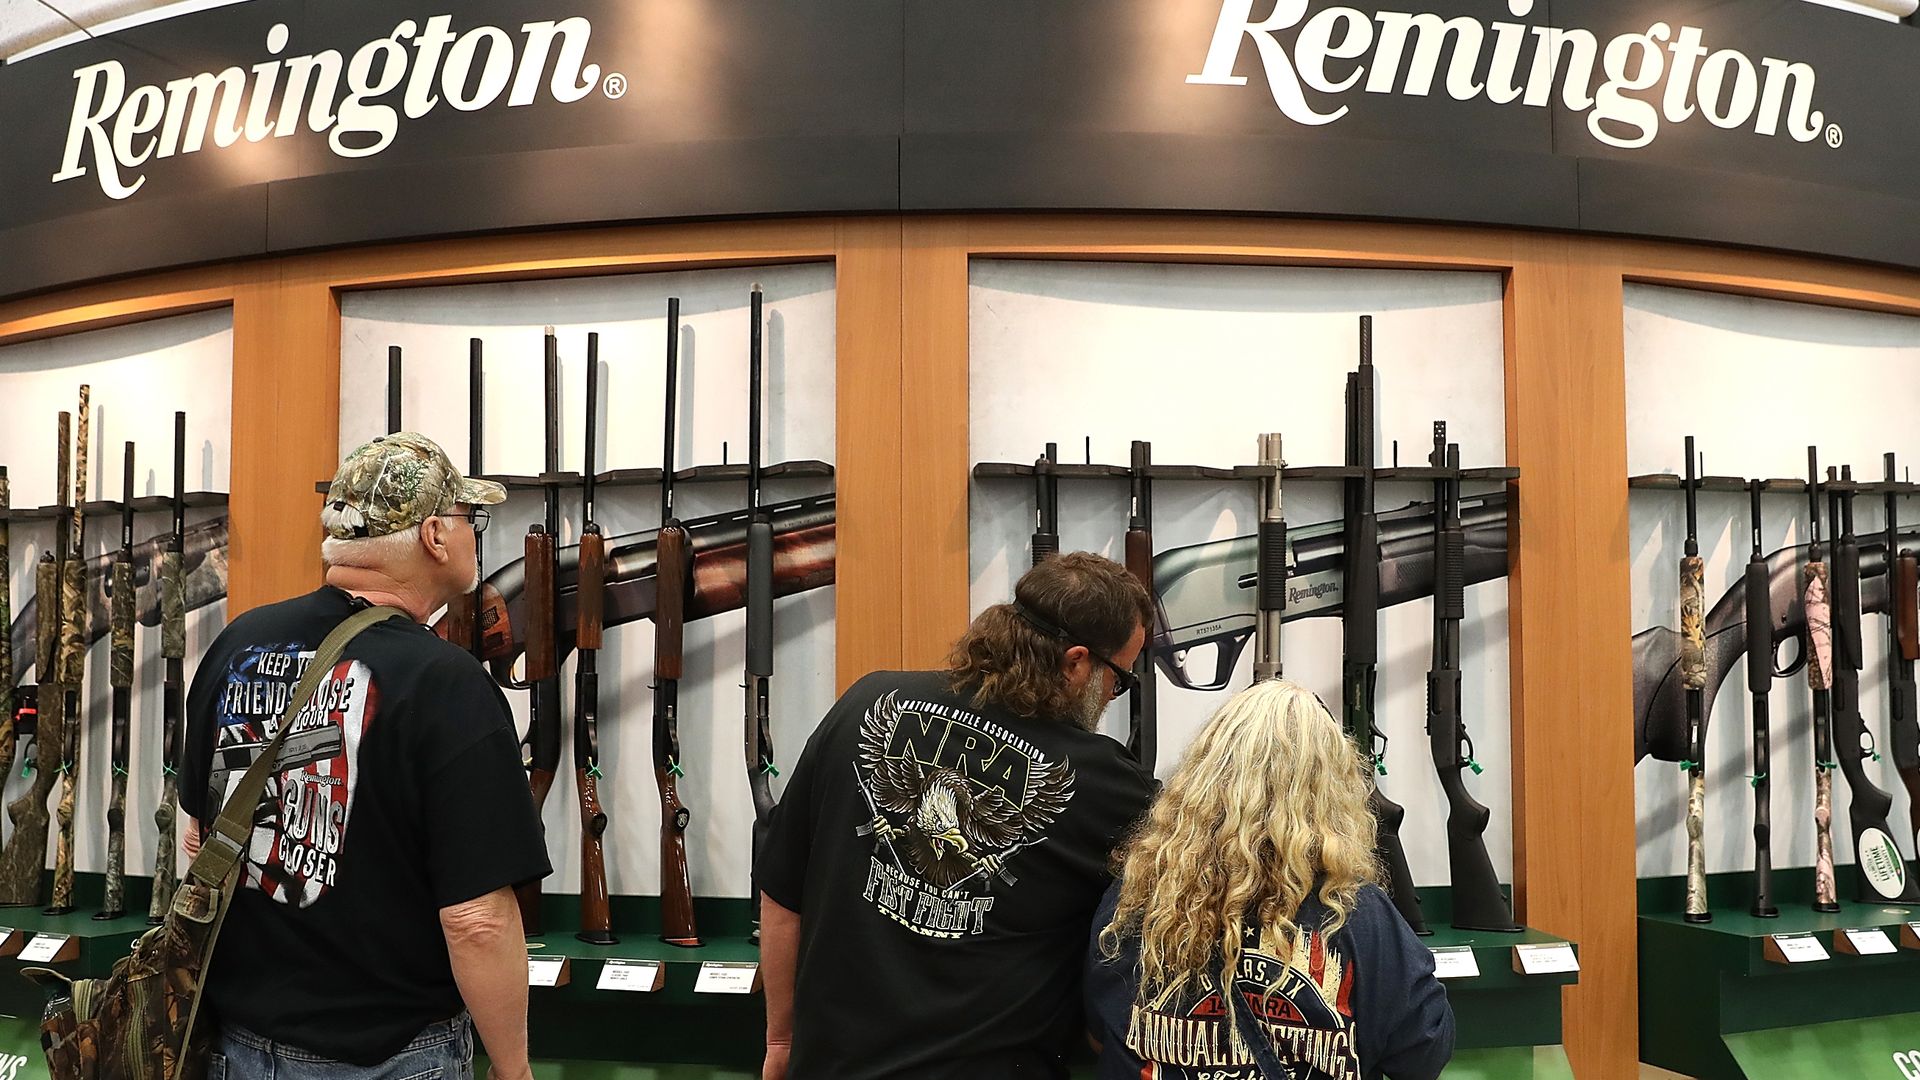 Remington Arms is targeting young gun enthusiasts in a previously undisclosed deal to get one of its rifles in "Call of Duty."